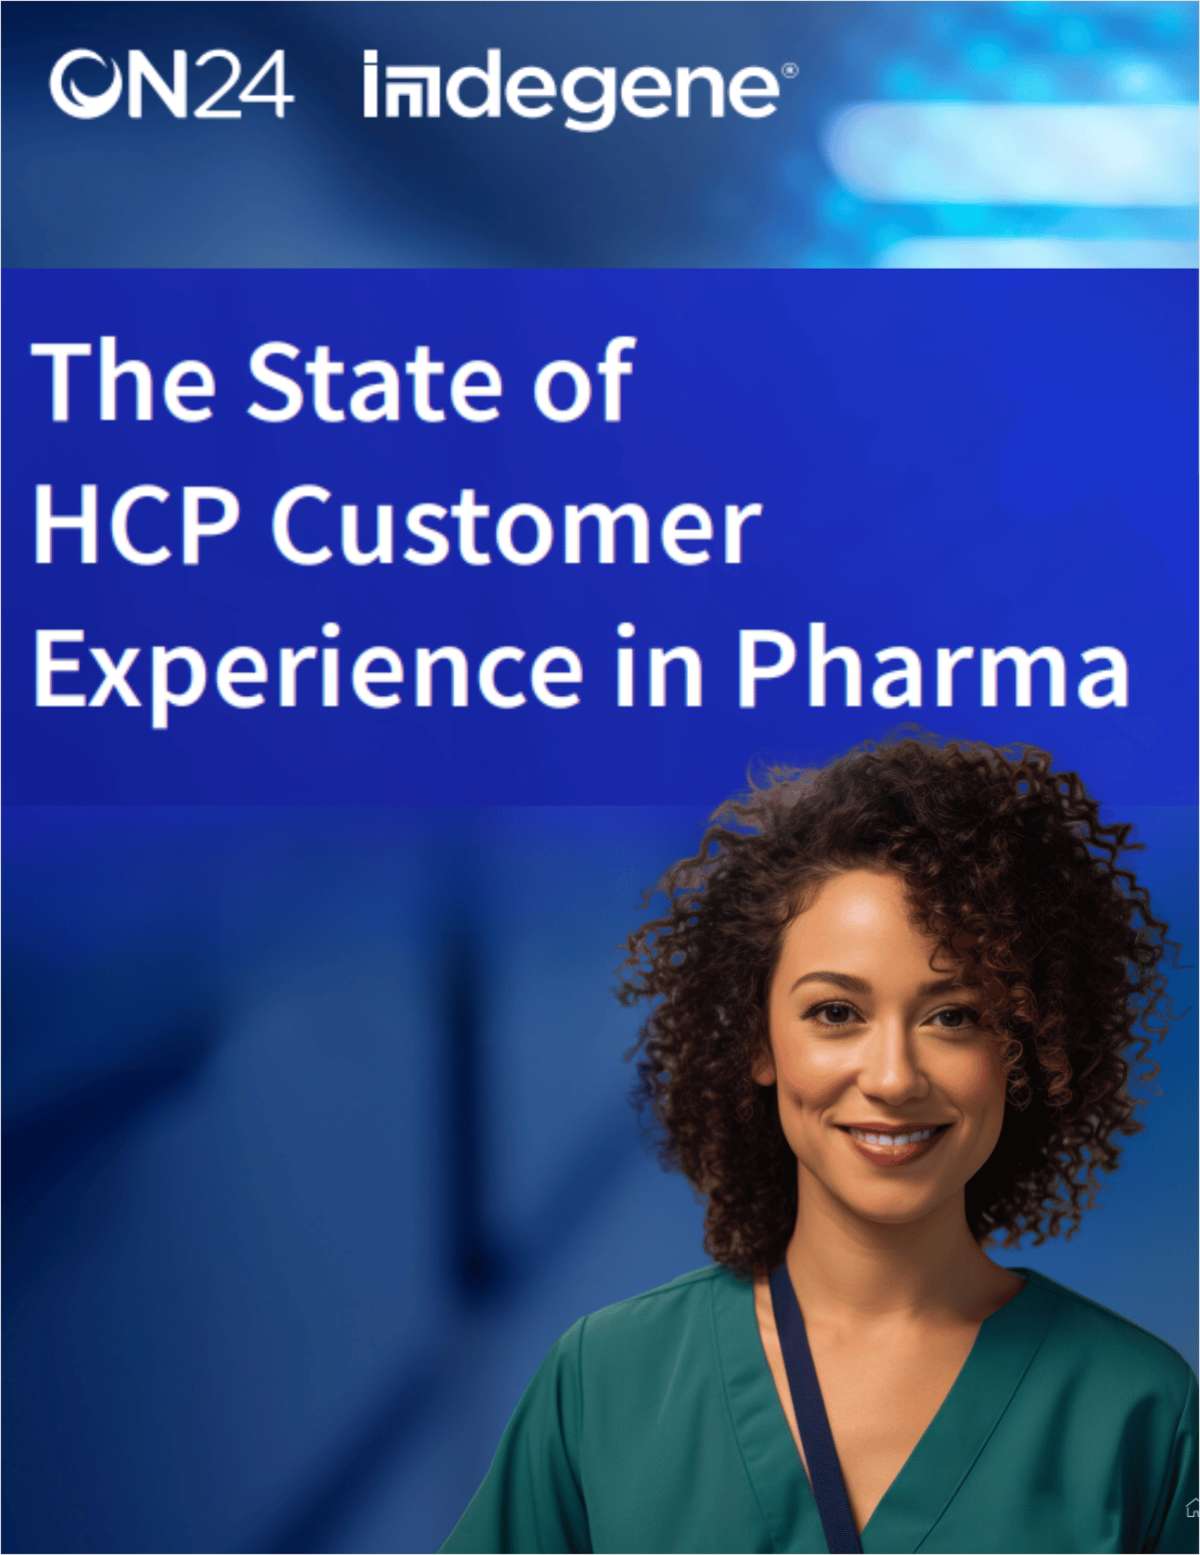 The State of HCP Customer Experience in Pharma